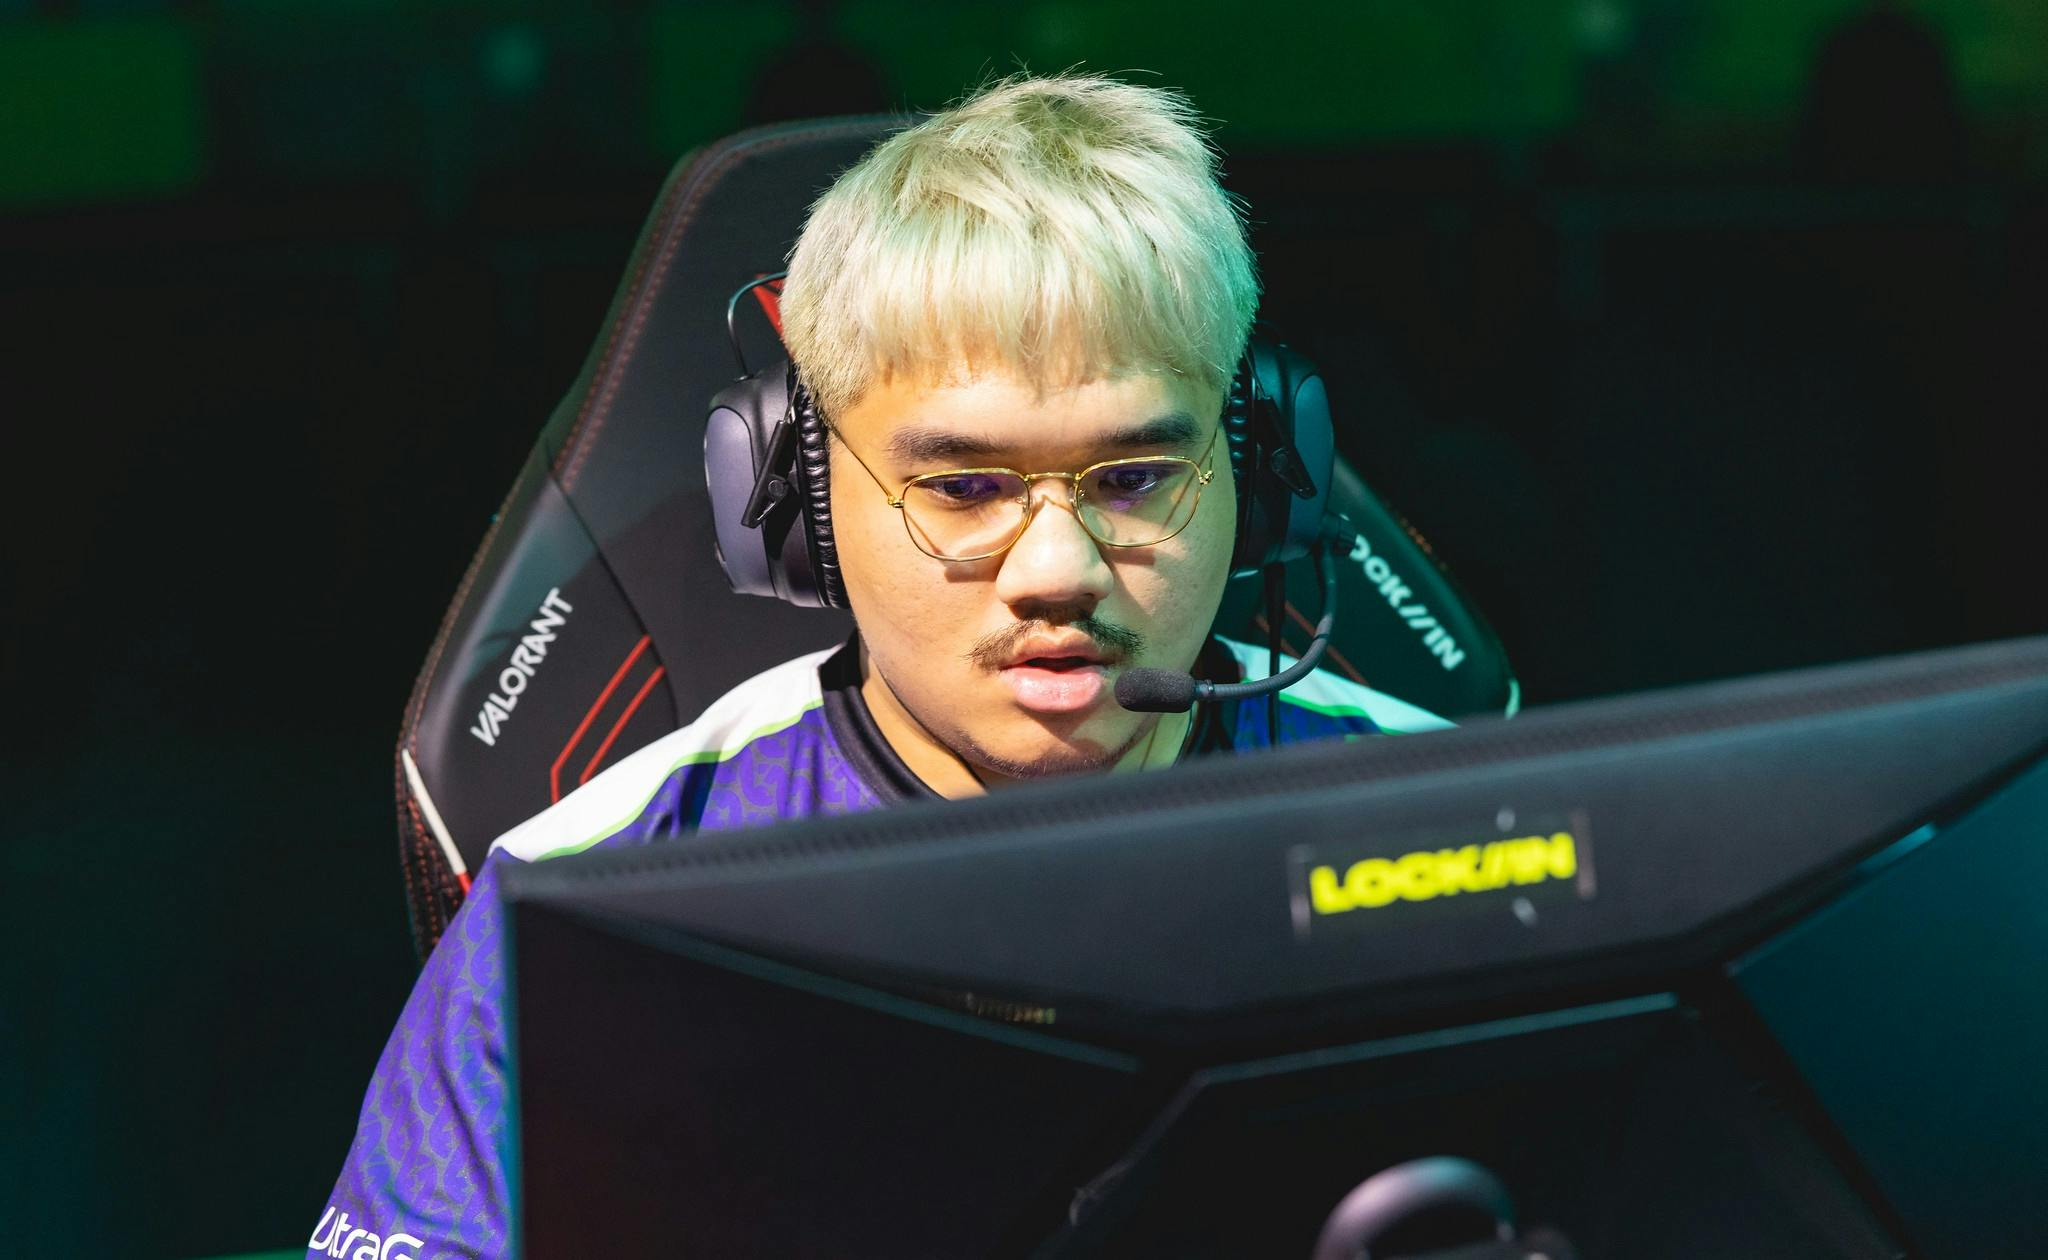 "I'm going to give myself a solid five and a half today. I wasn't really feeling it." - Jawgemo on individual performance in Evil Geniuses loss